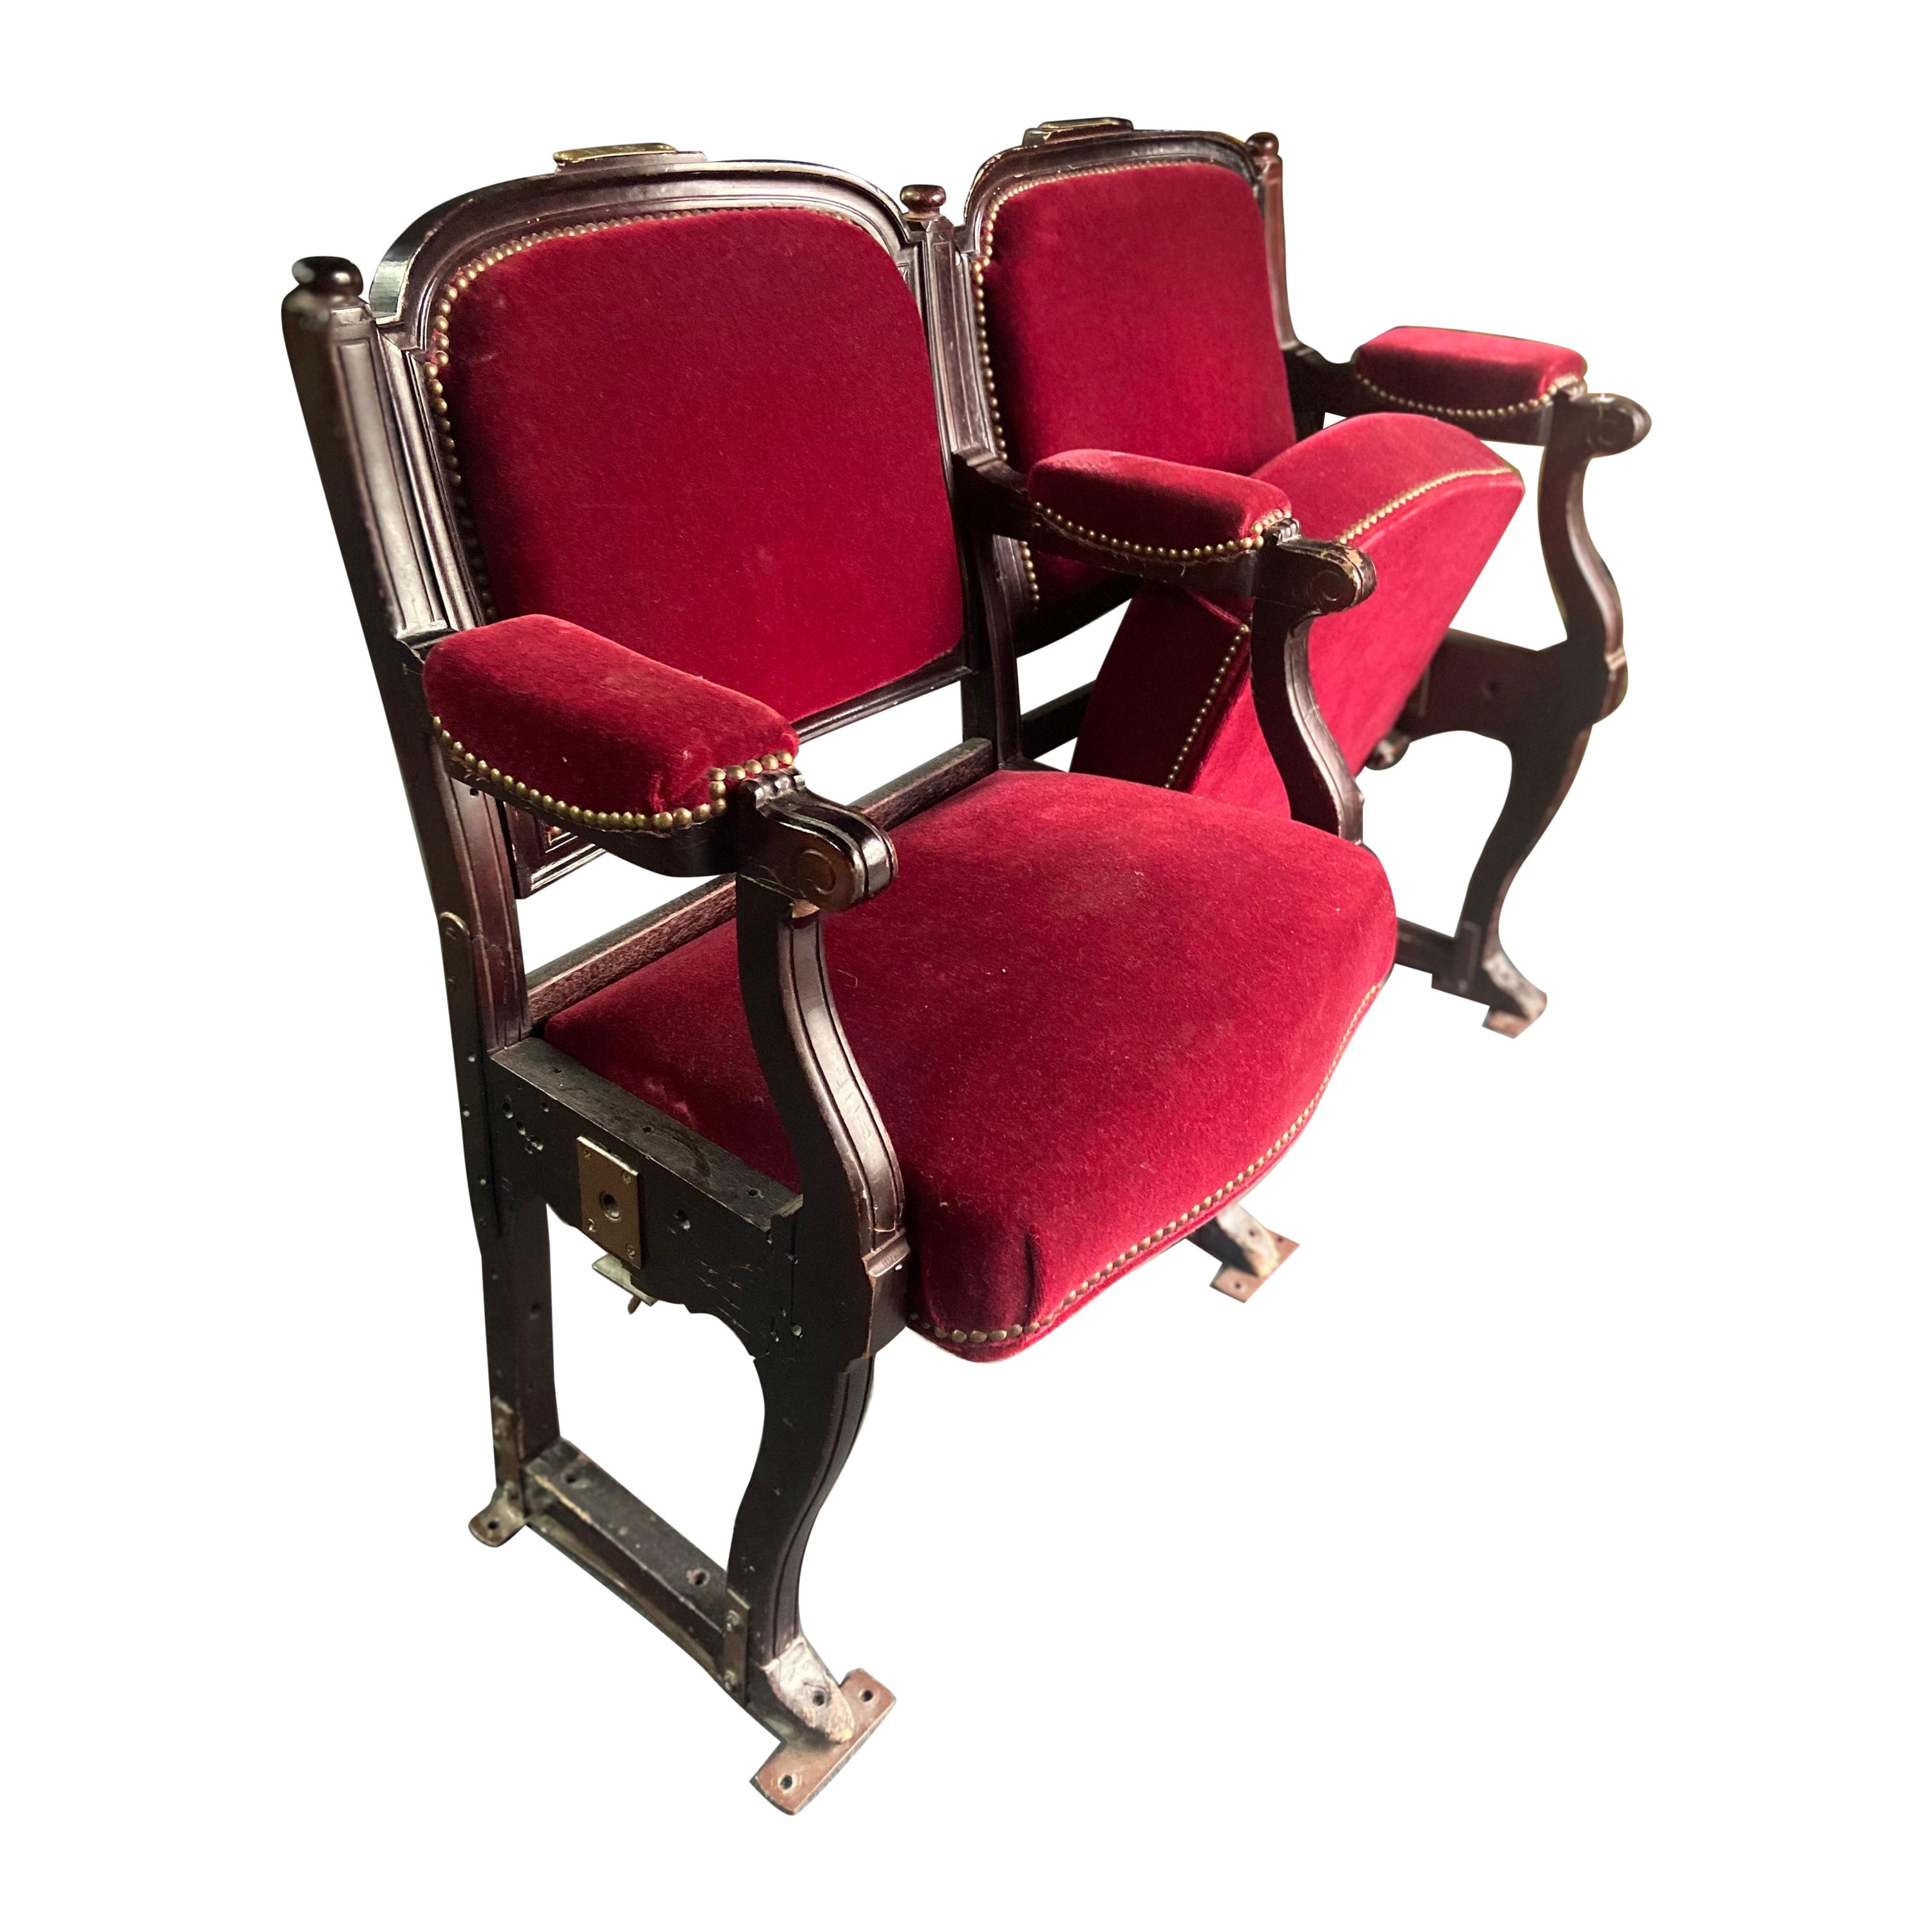 20th Century French Two Seater Theater Seats in Wood and Metal in Red Velvet